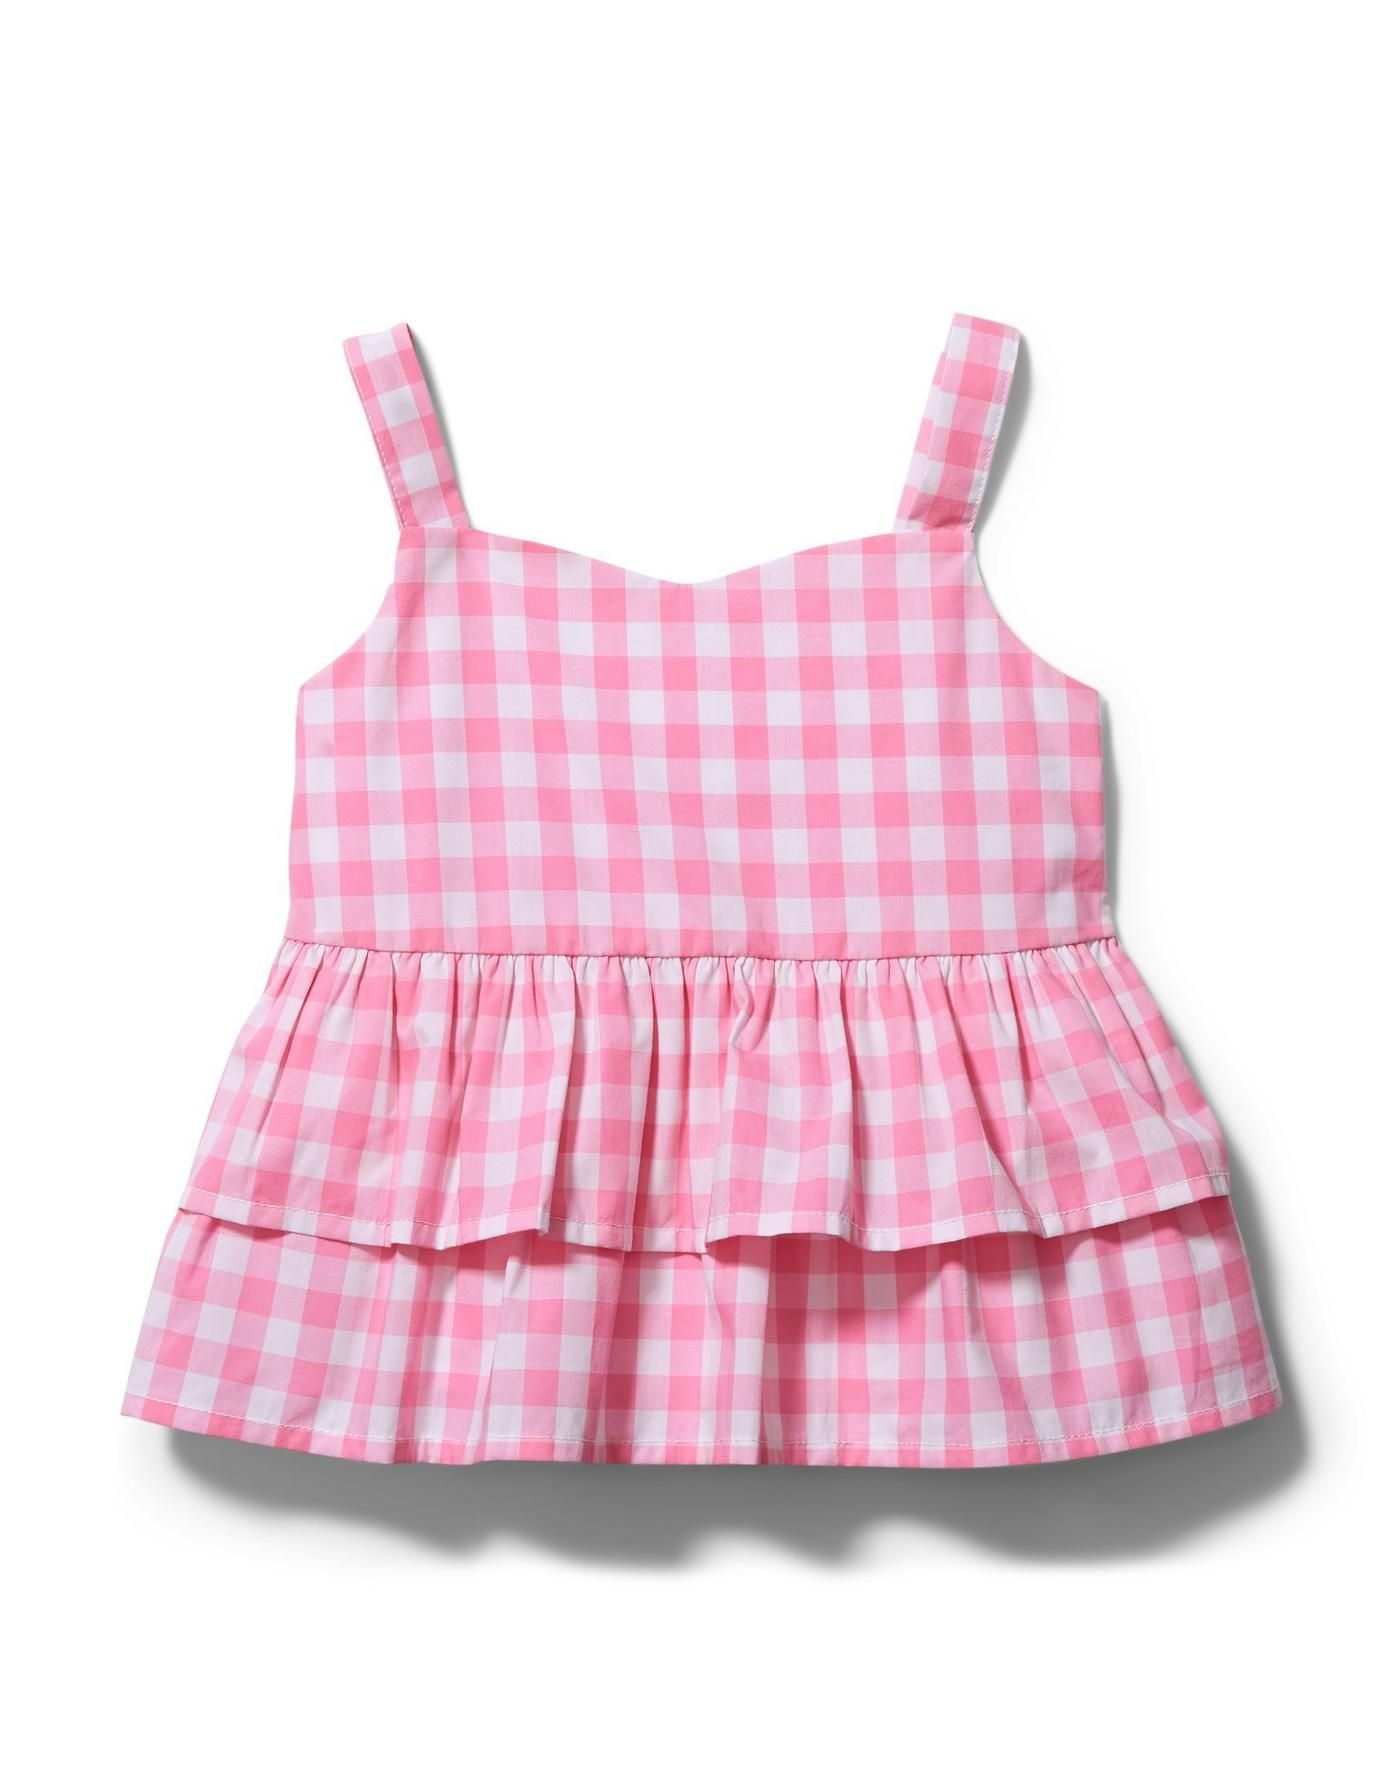 Gingham Tiered Ruffle Top | Janie and Jack